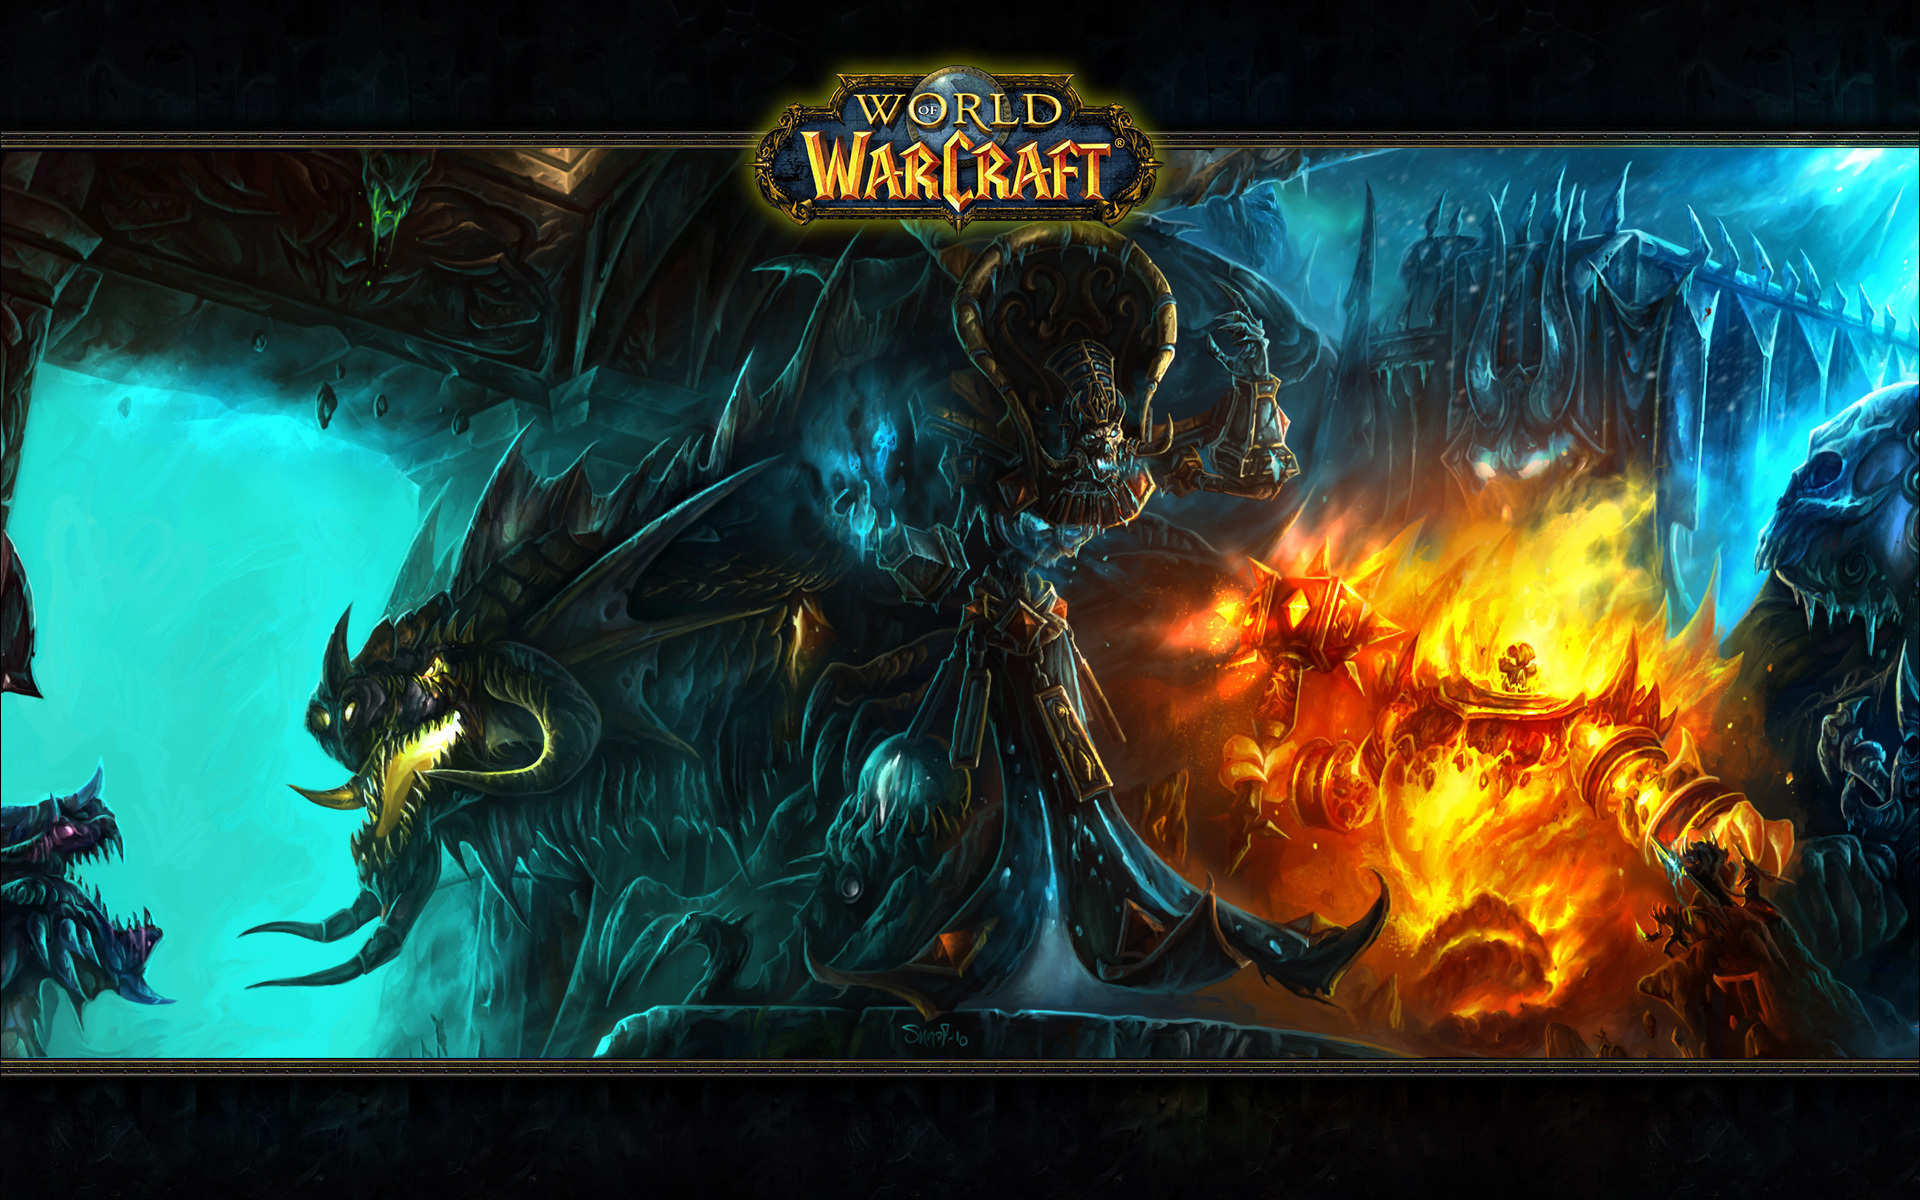 General 1920x1200 World of Warcraft video games fantasy art PC gaming Blizzard Entertainment